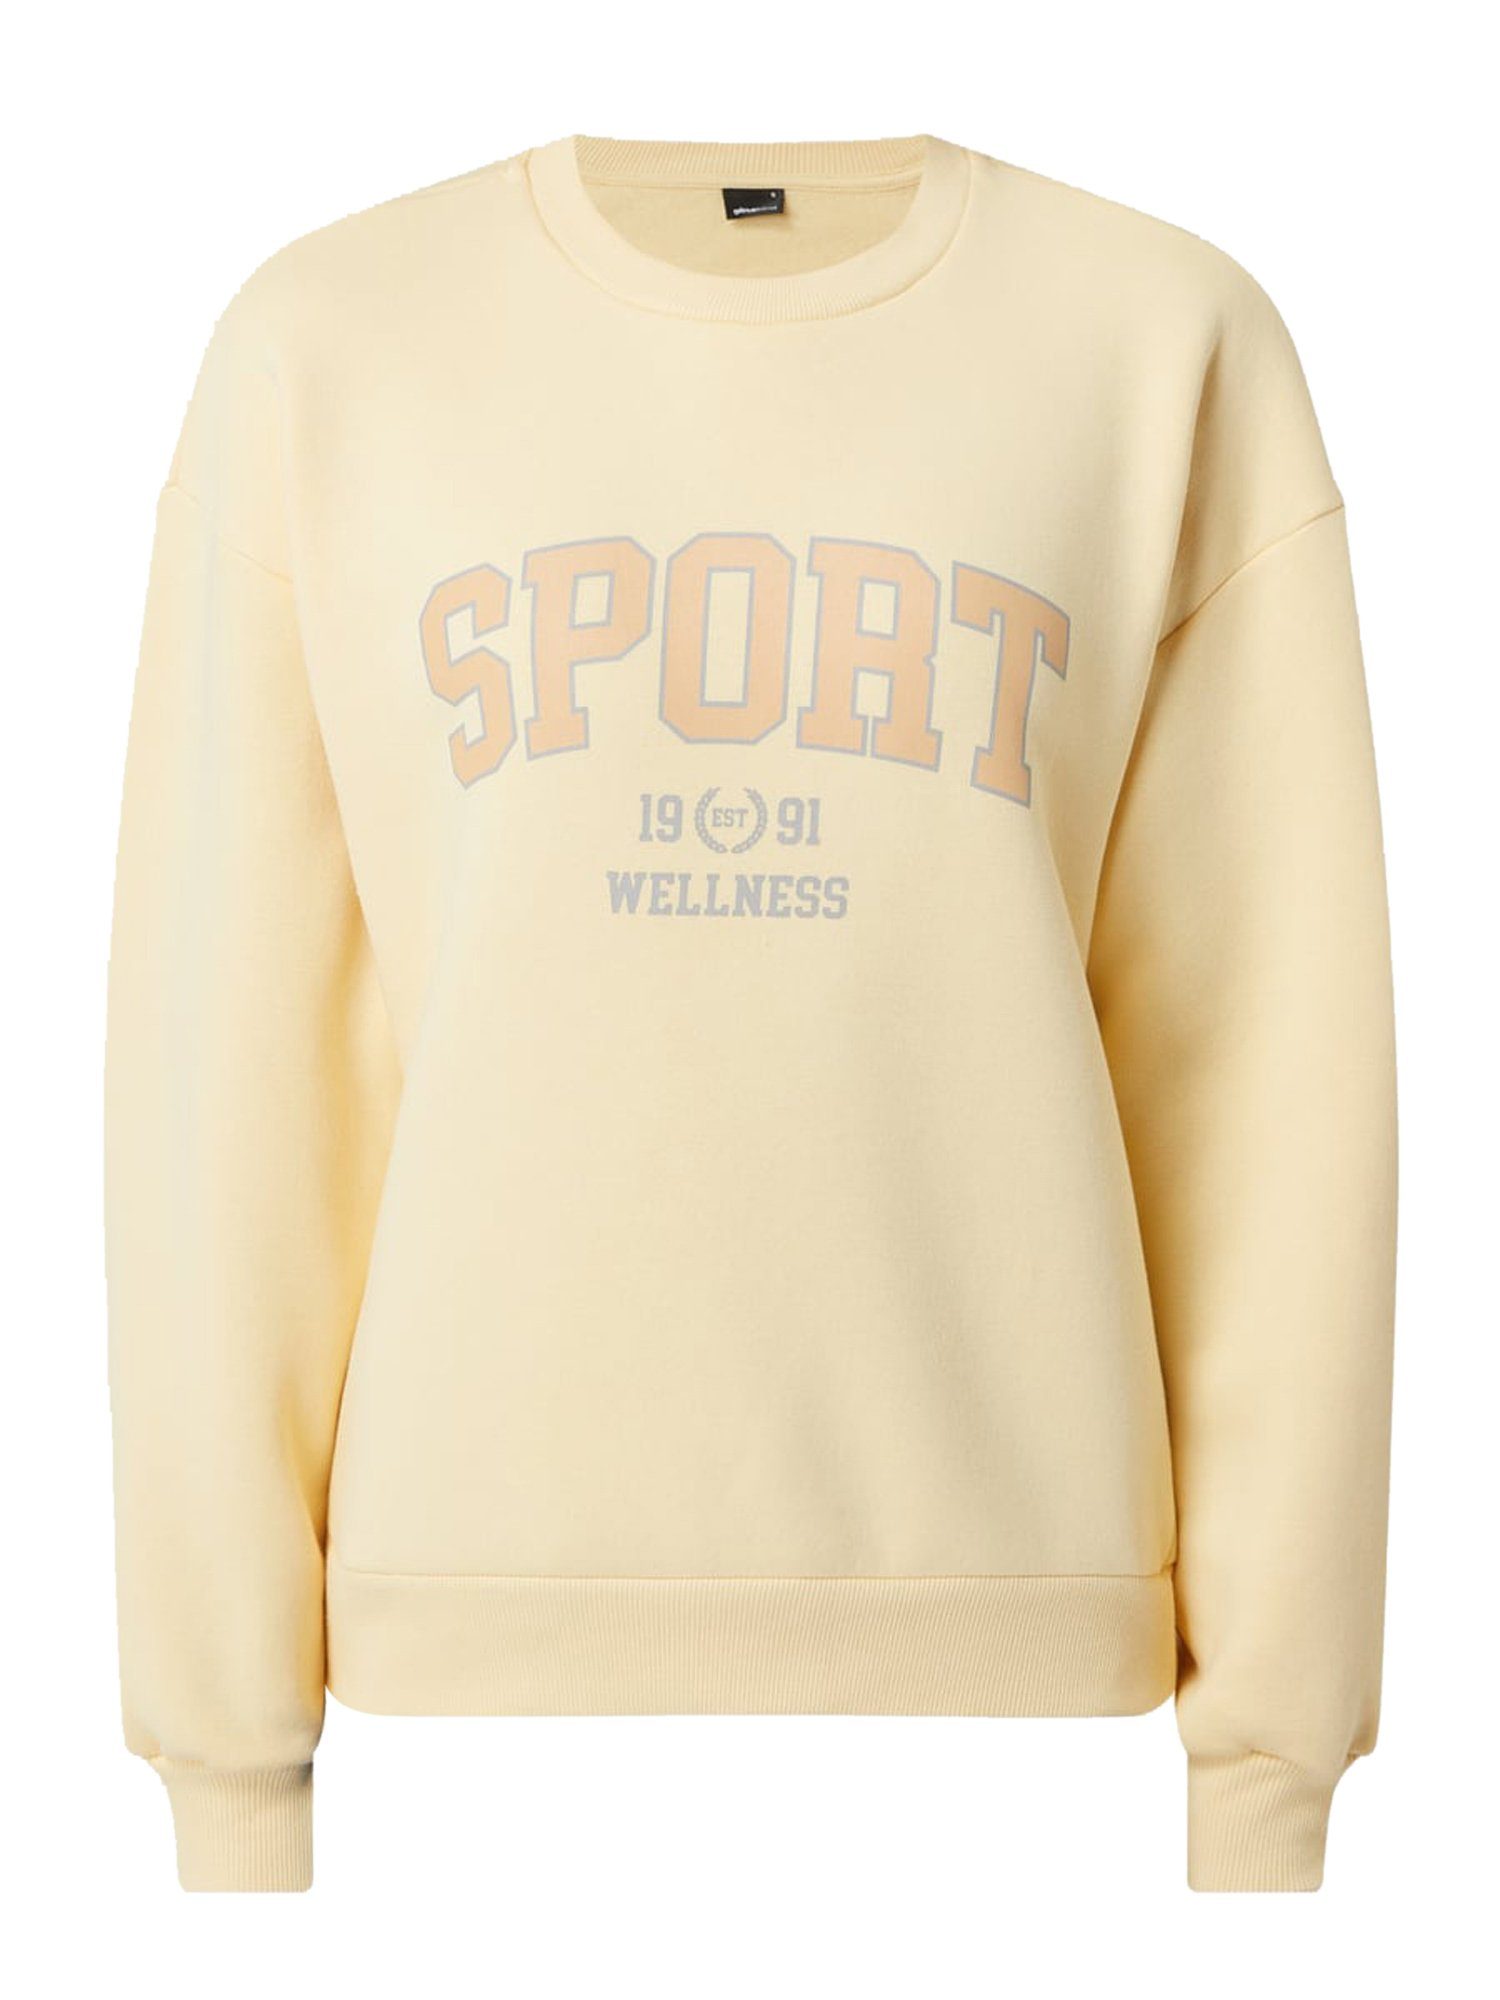 Freshlions Sweater Gina Tricot Eve Pullover Gelb